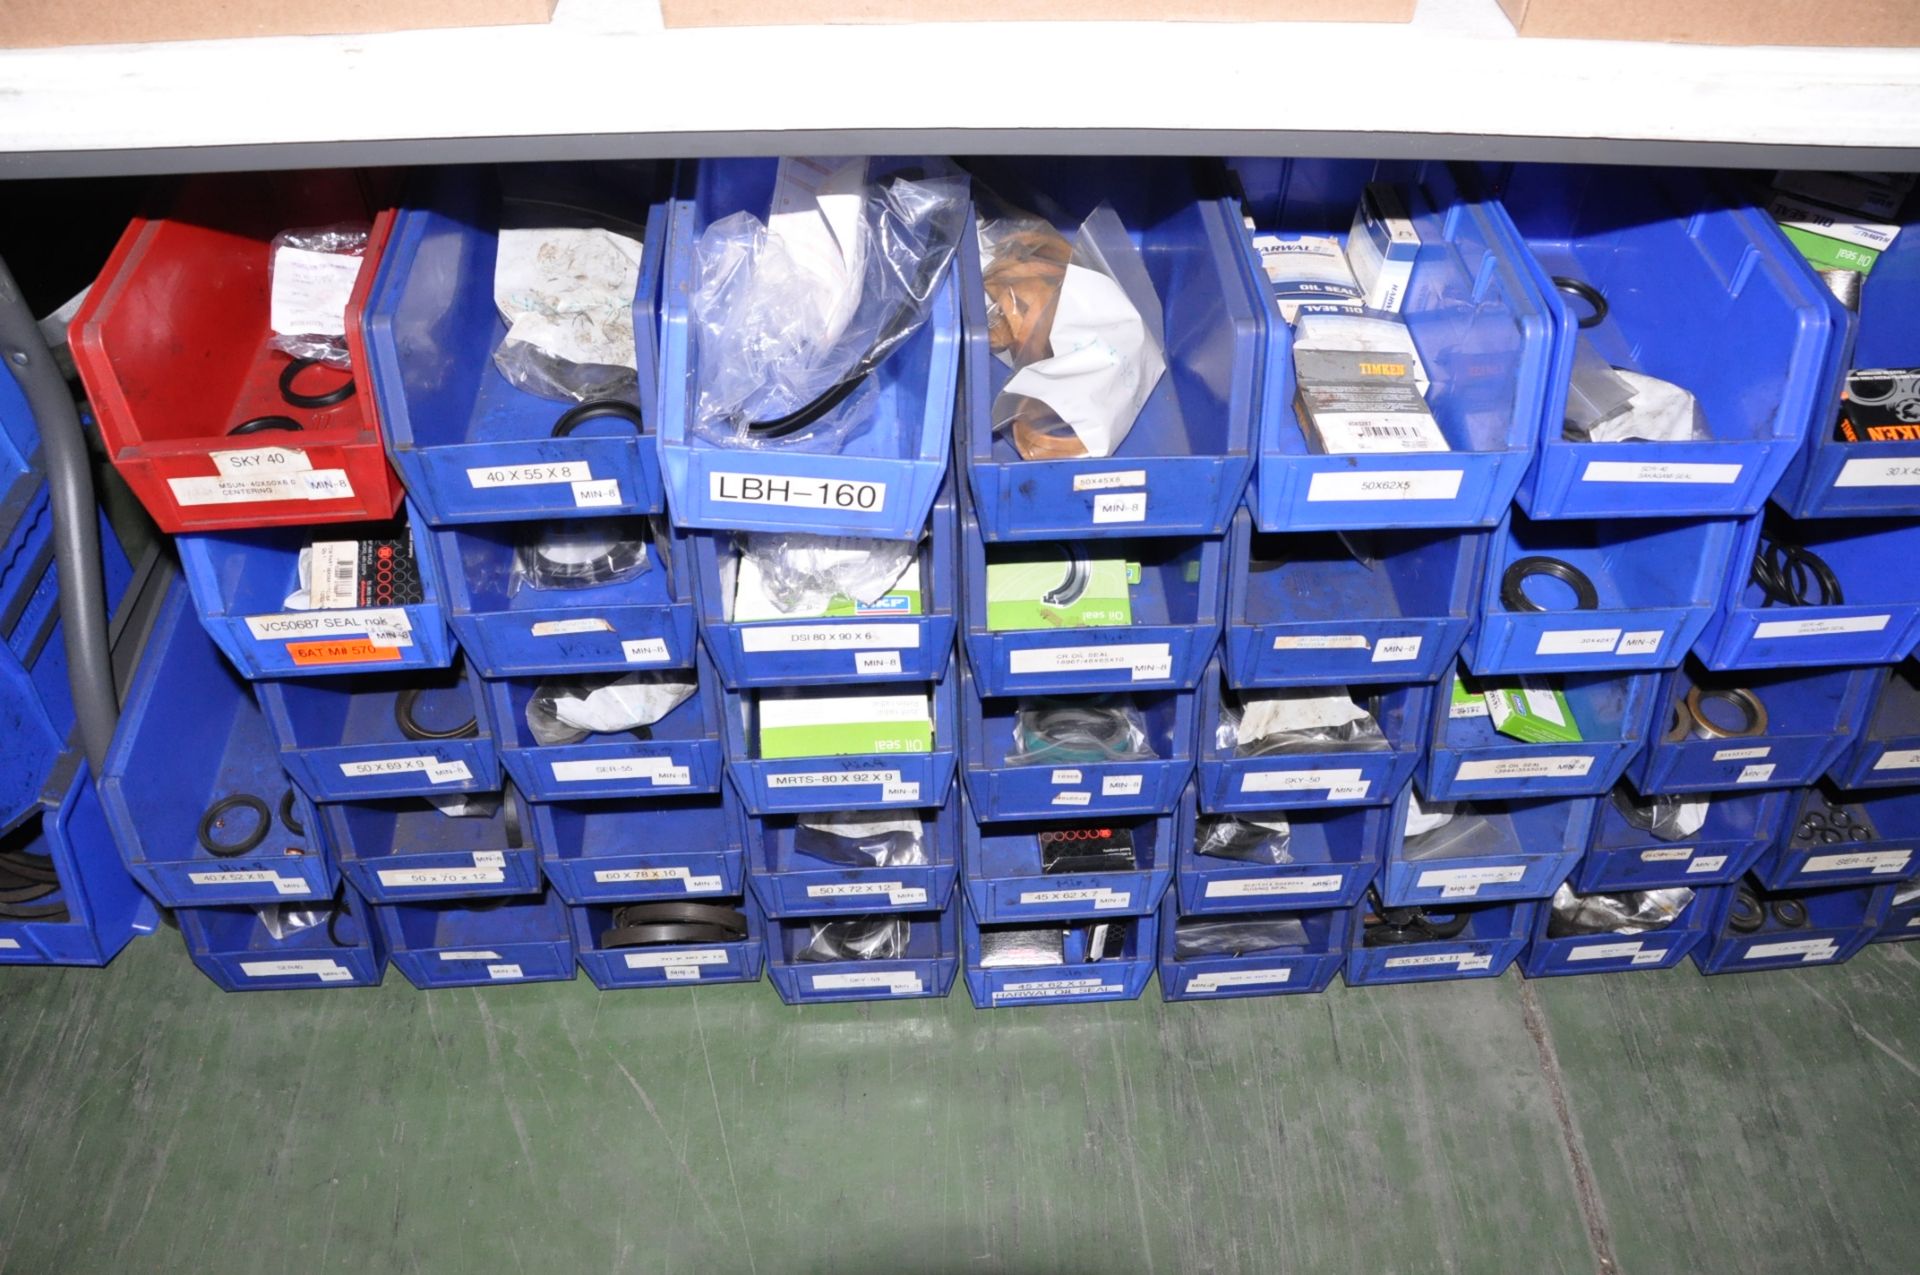 Lot-Various Bearing Seals in Blue Parts Bins on Floor Under (3) Tables, (E-3) - Image 6 of 6